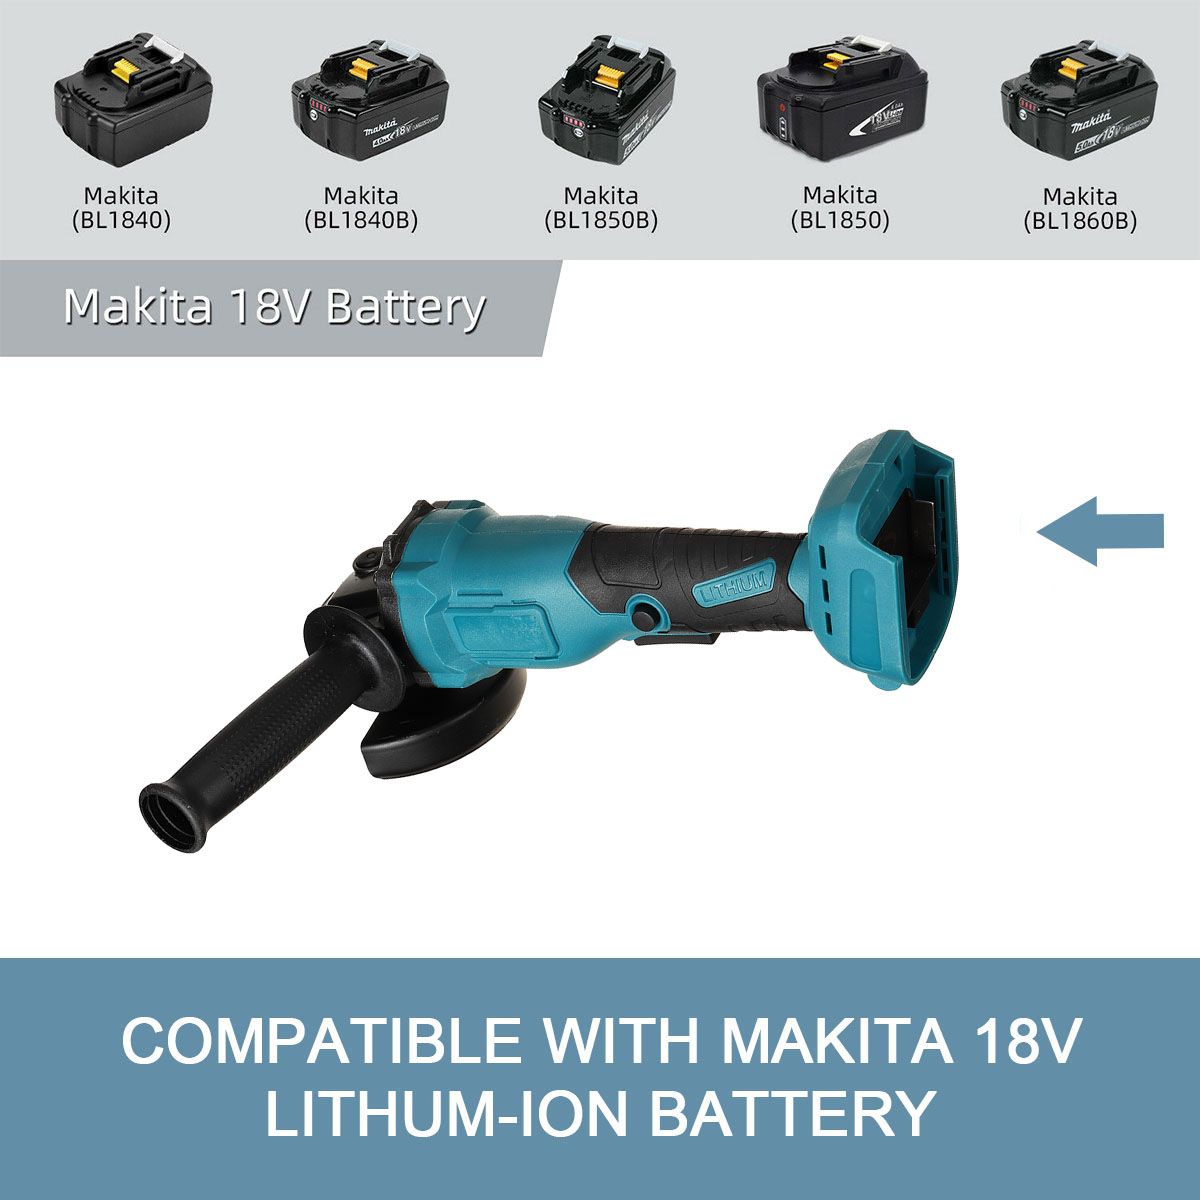 800W-100mm-Cordless-Electric-Angle-Grinder-10000rpm-Portable-Cut-Off-Tool-For-Makita-18V-Battery-1740216